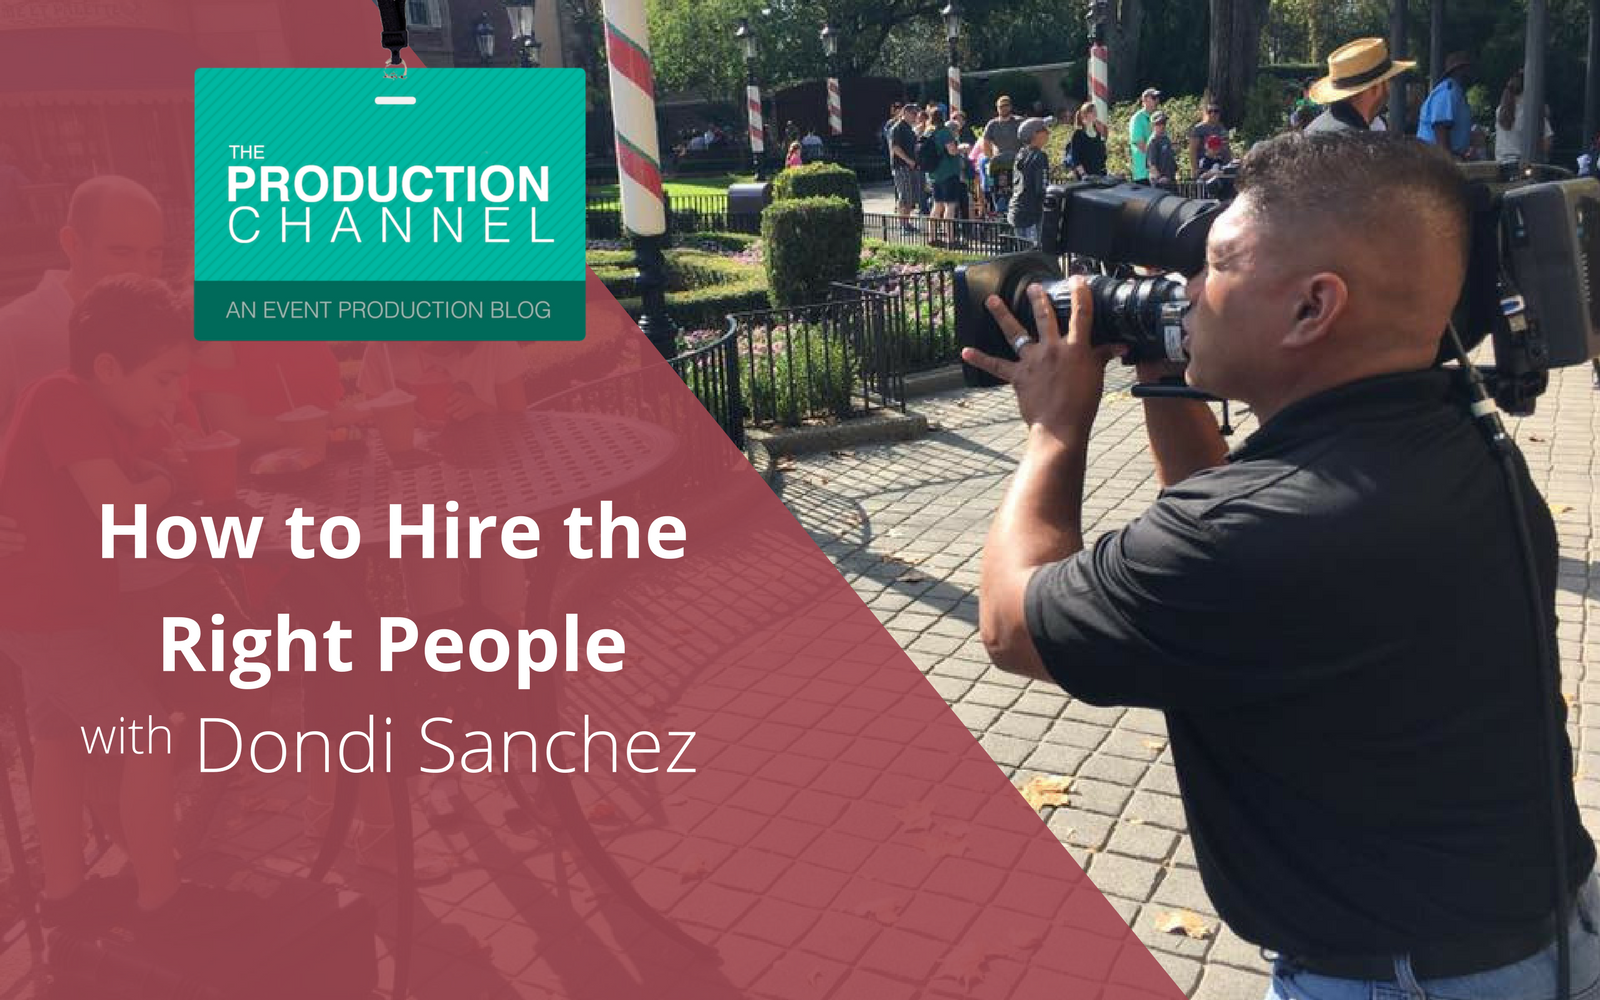 How to Hire the Right People with Dondi Sanchez